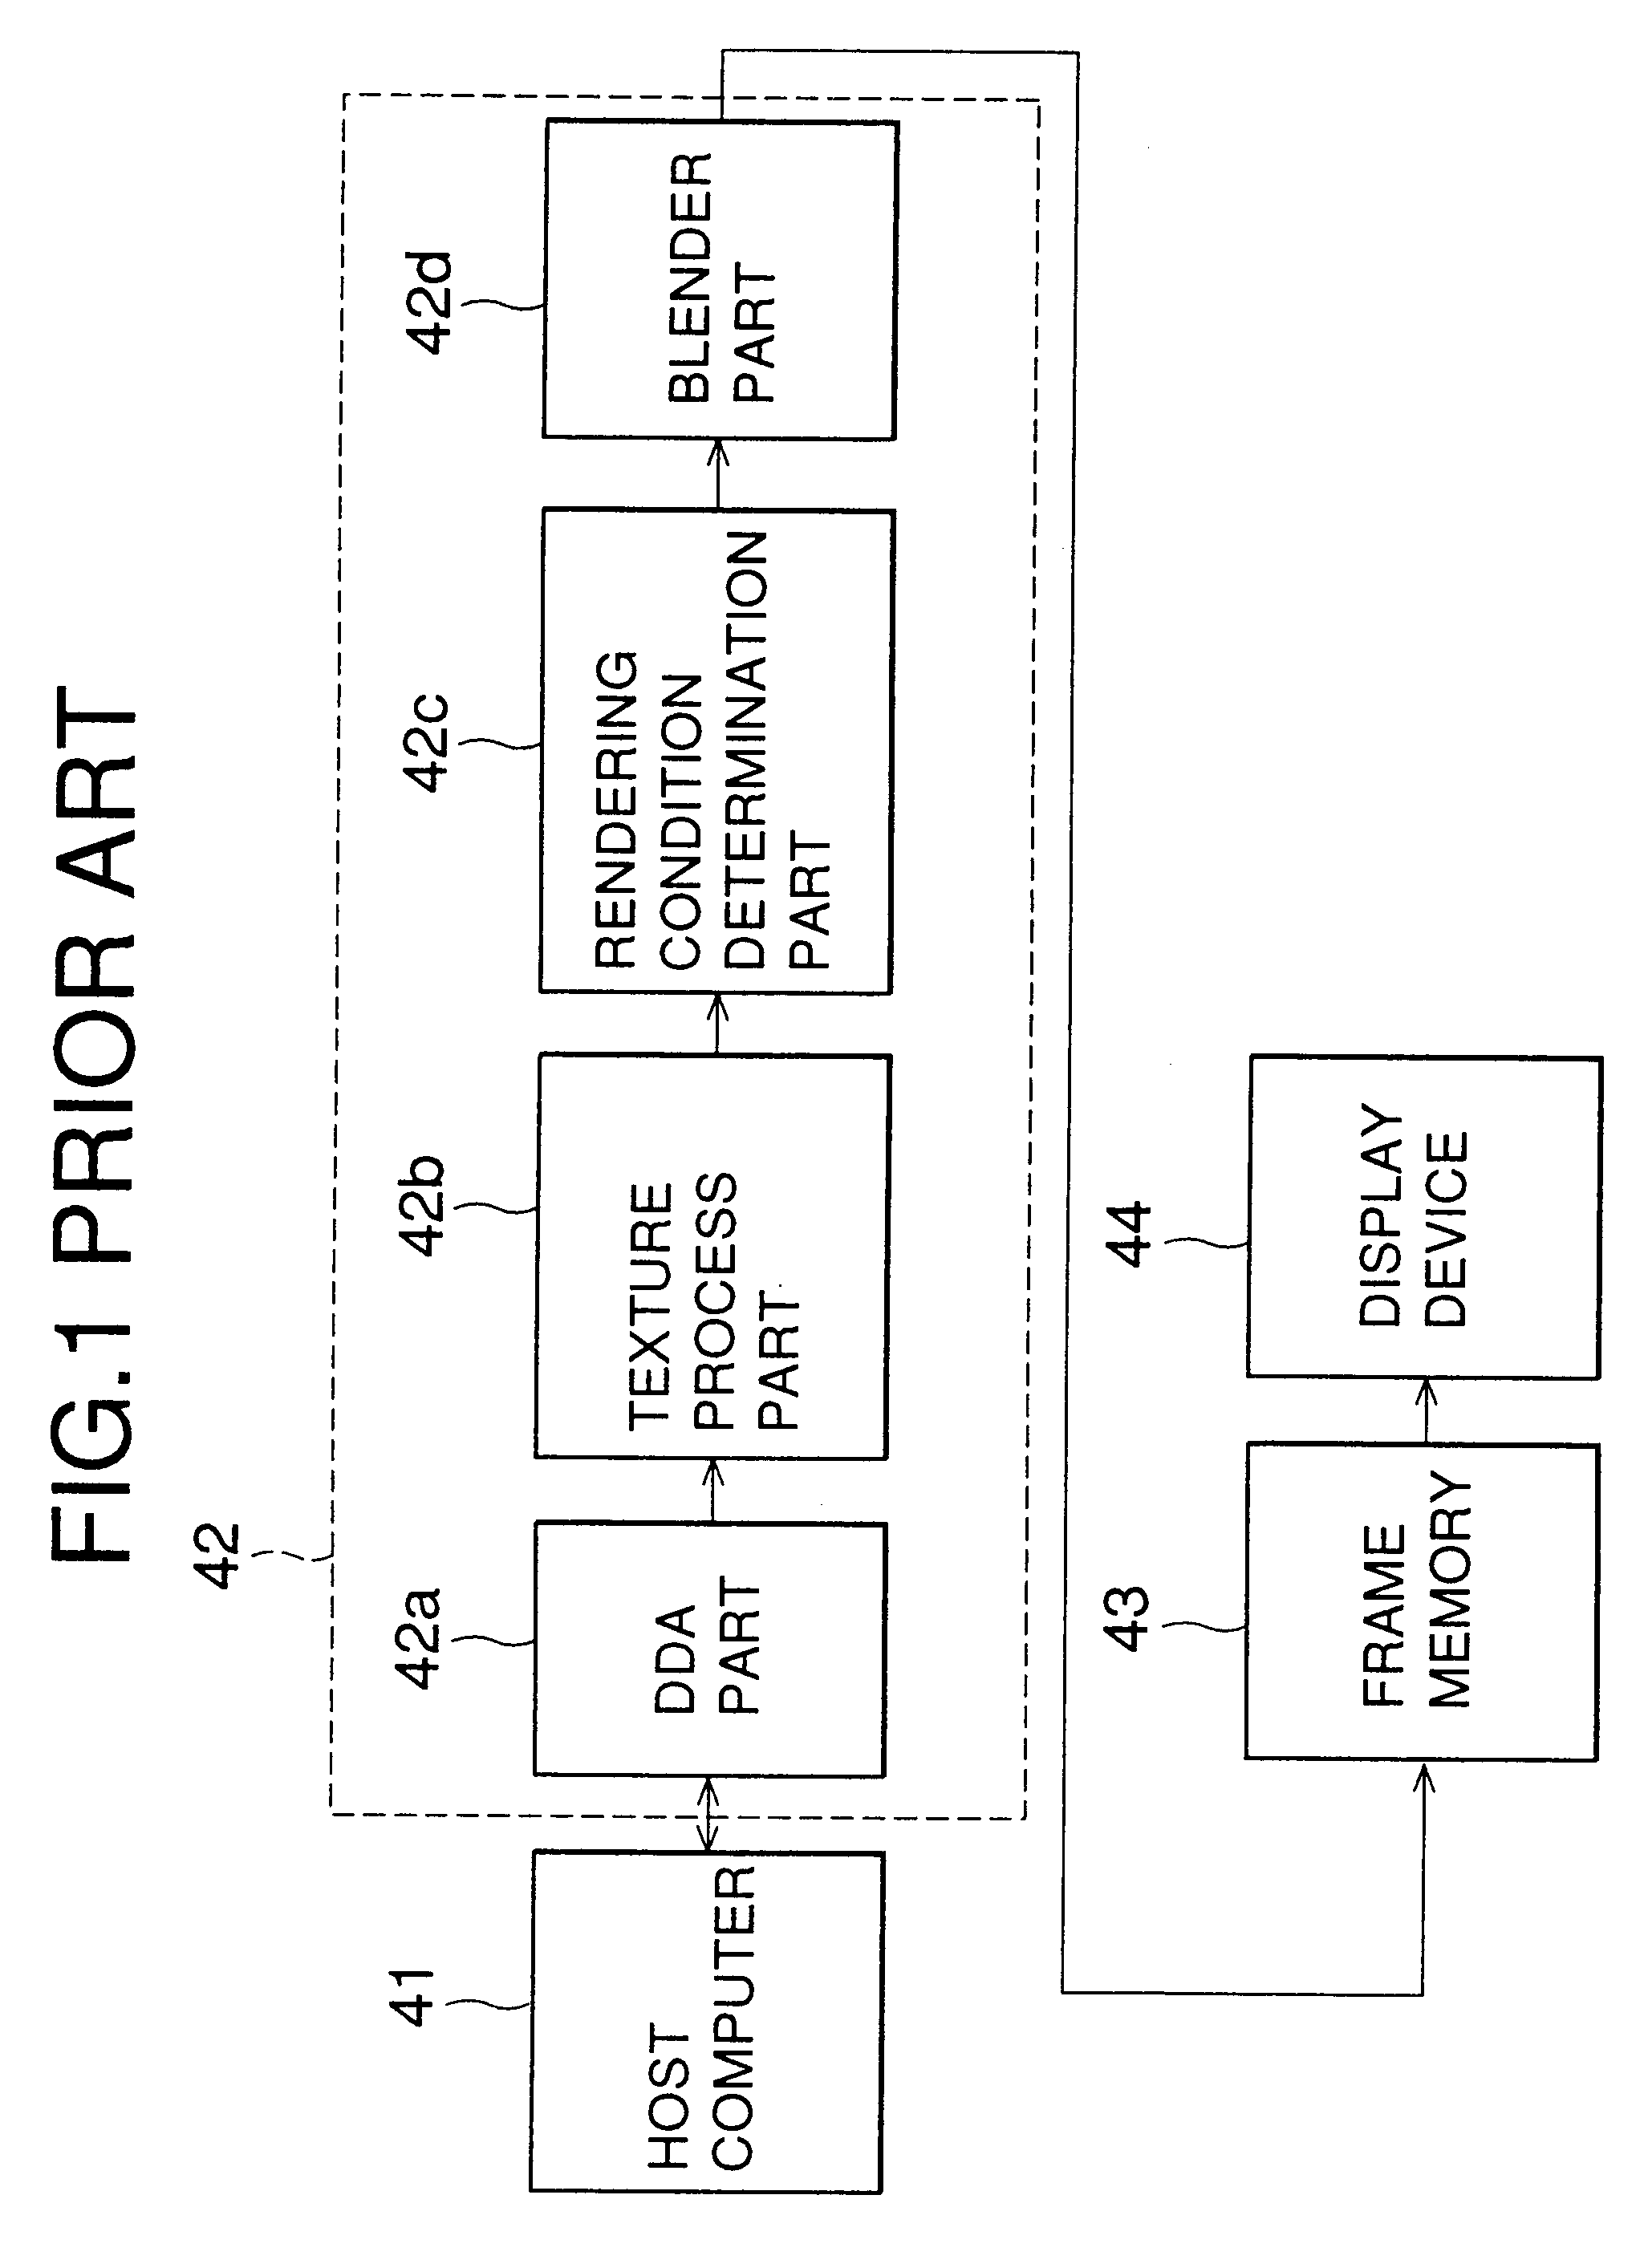 Information processing apparatus and method for processing three-dimensional graphics using a second information processing unit for processing processed-related information